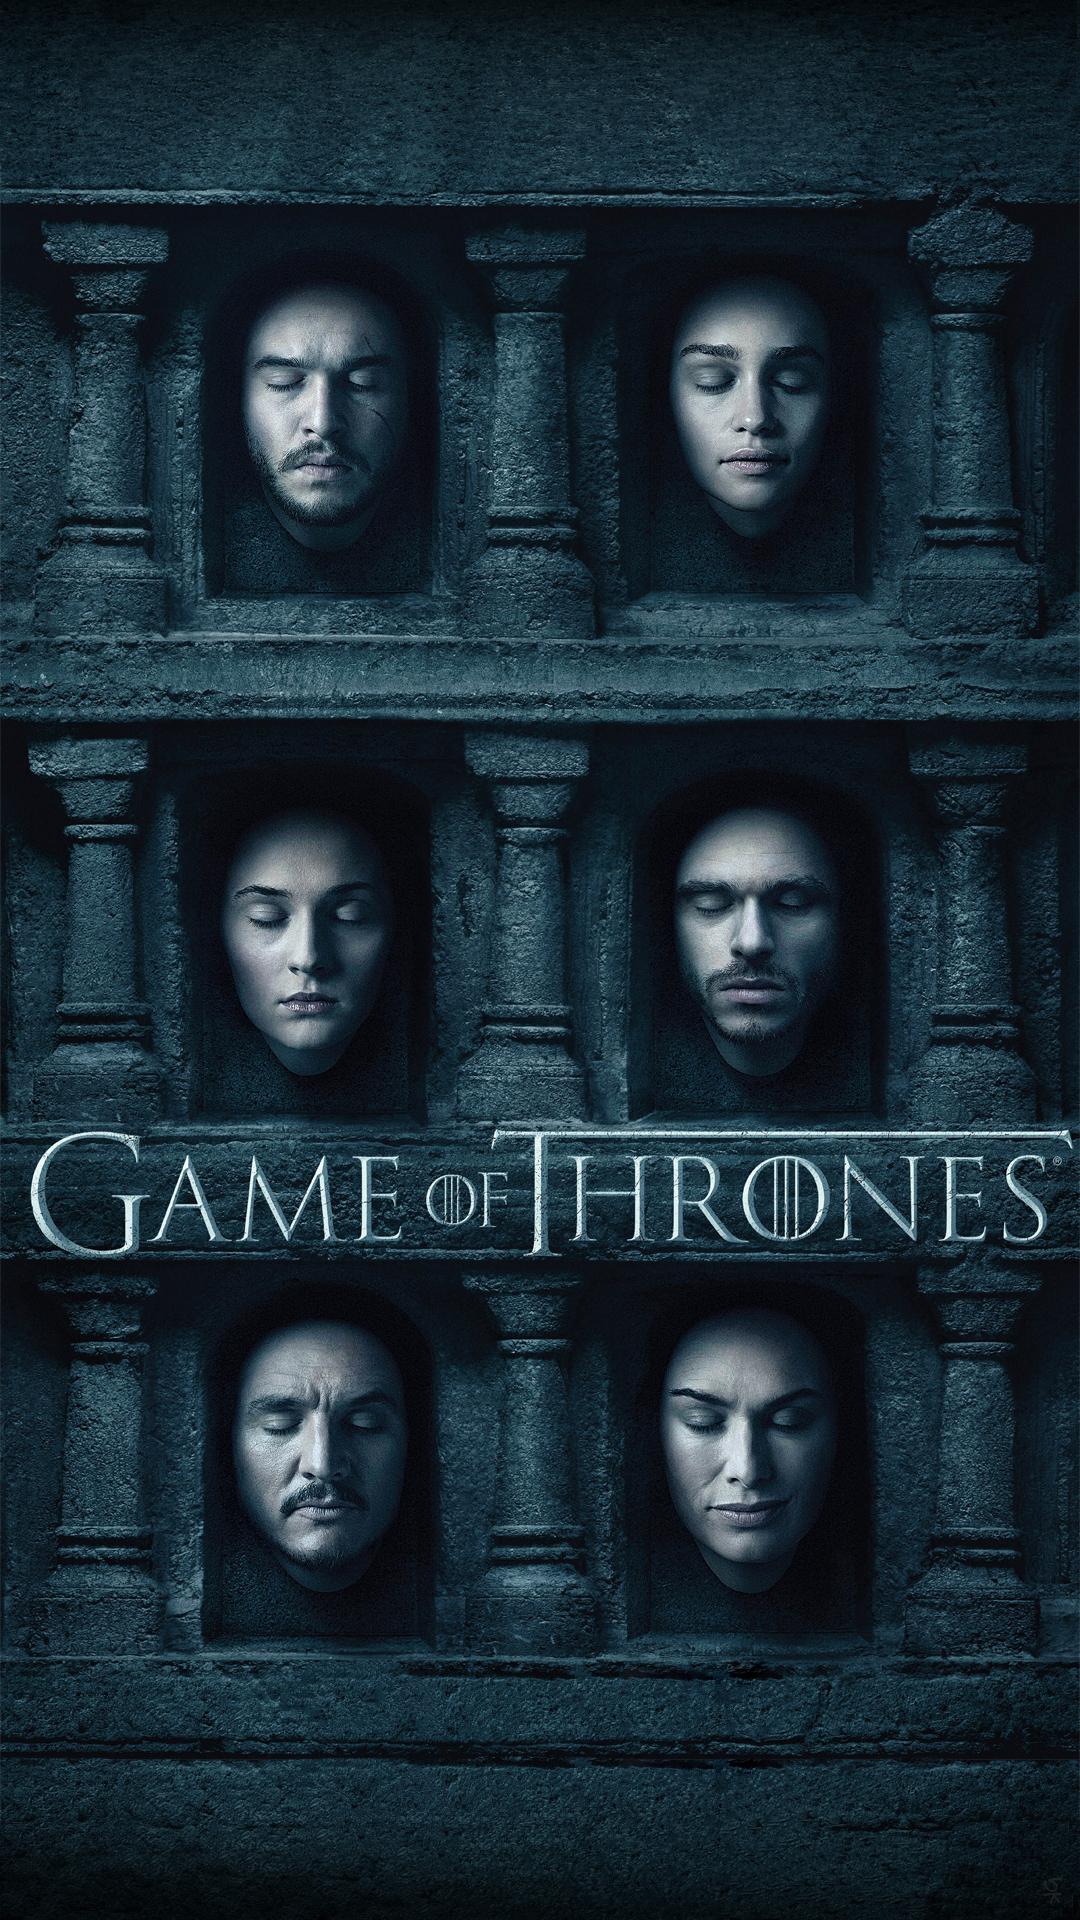 Game Of Thrones ゲーム オブ スローンズ Iphone Wallpapers